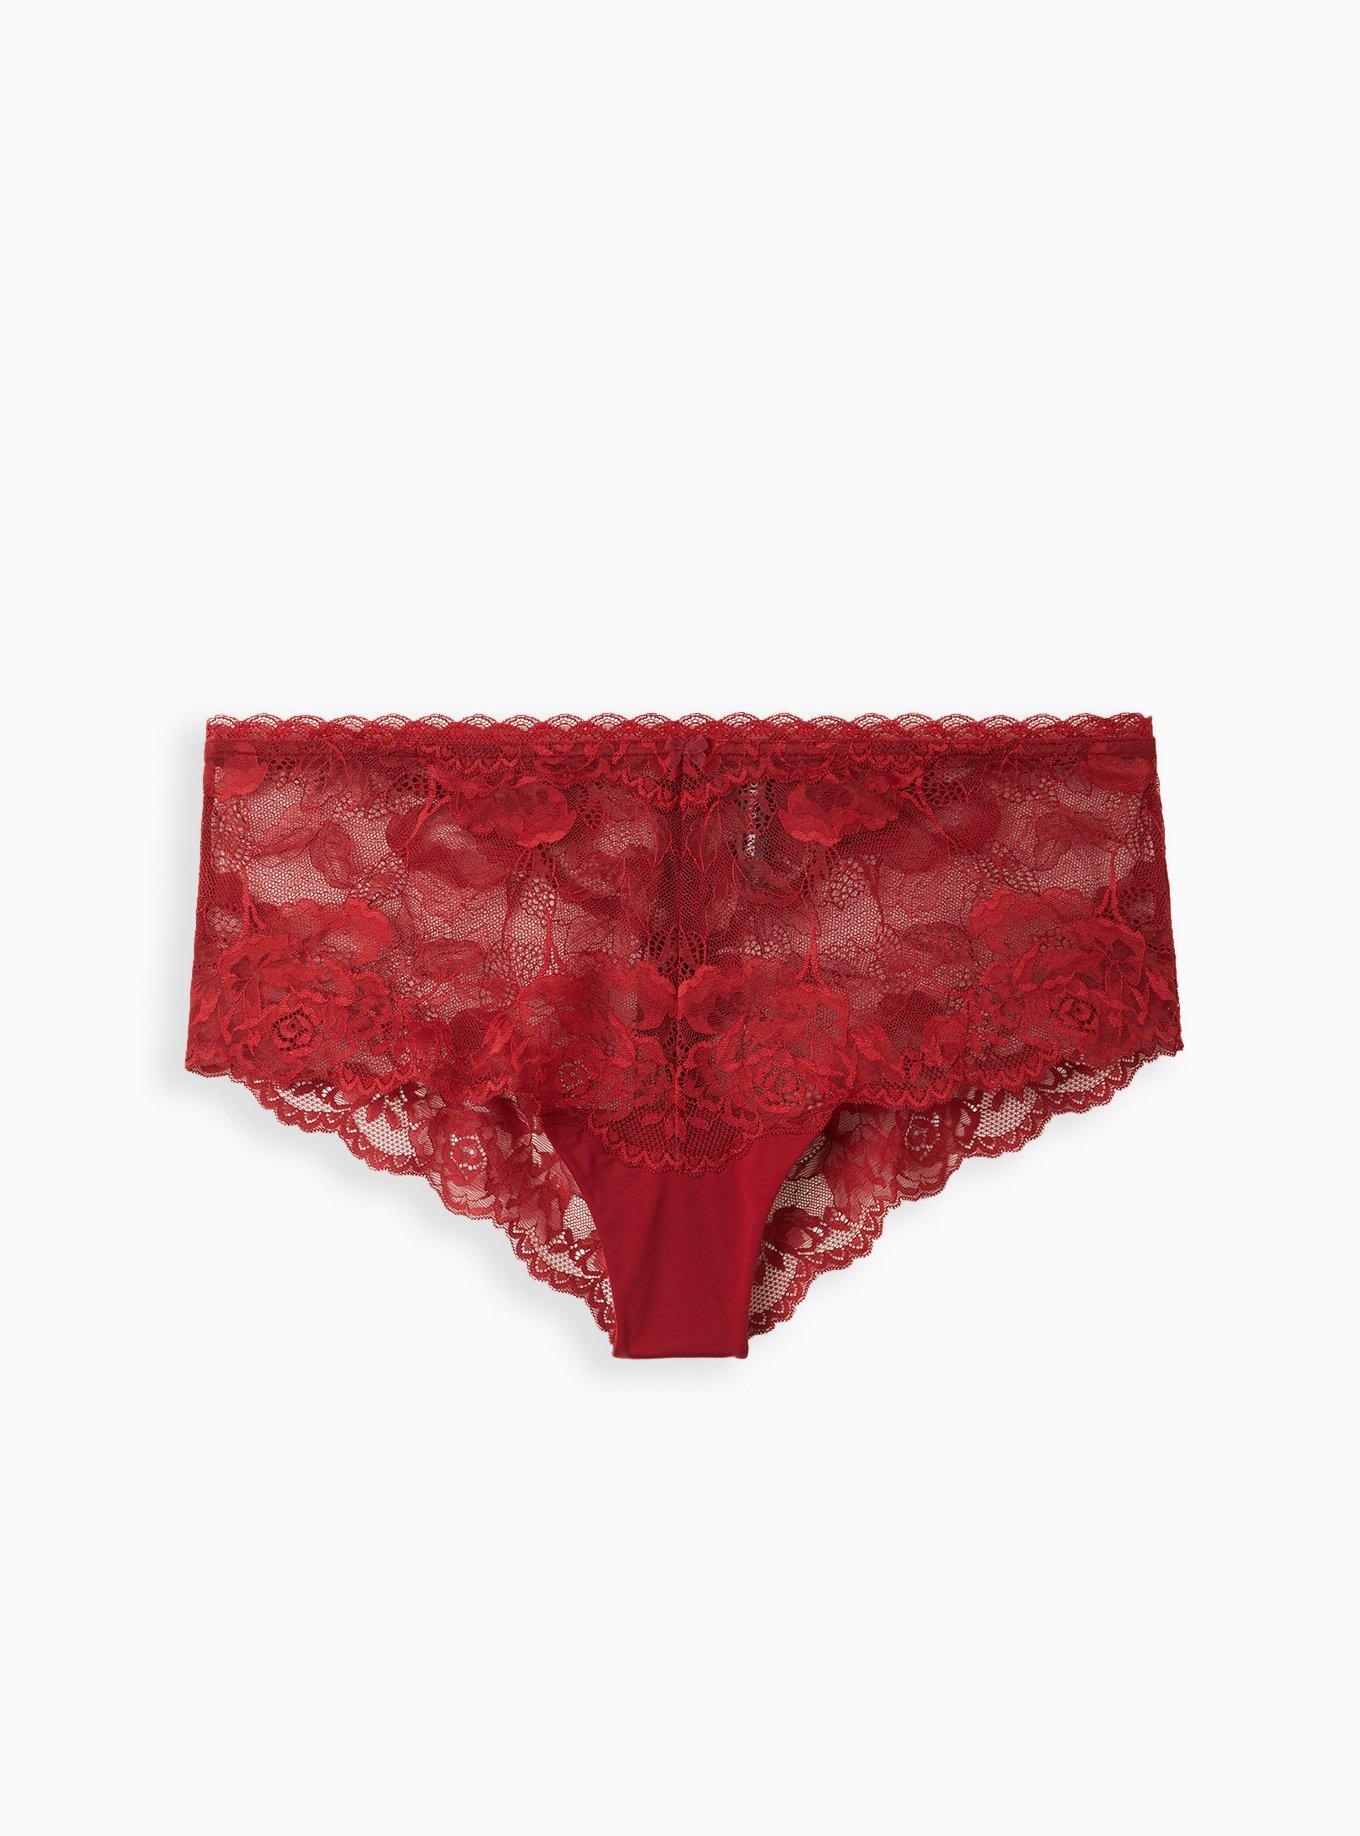 SG Ready Stock」Sexy Panties ｜Low-rise Sexy Underwear ｜Lace